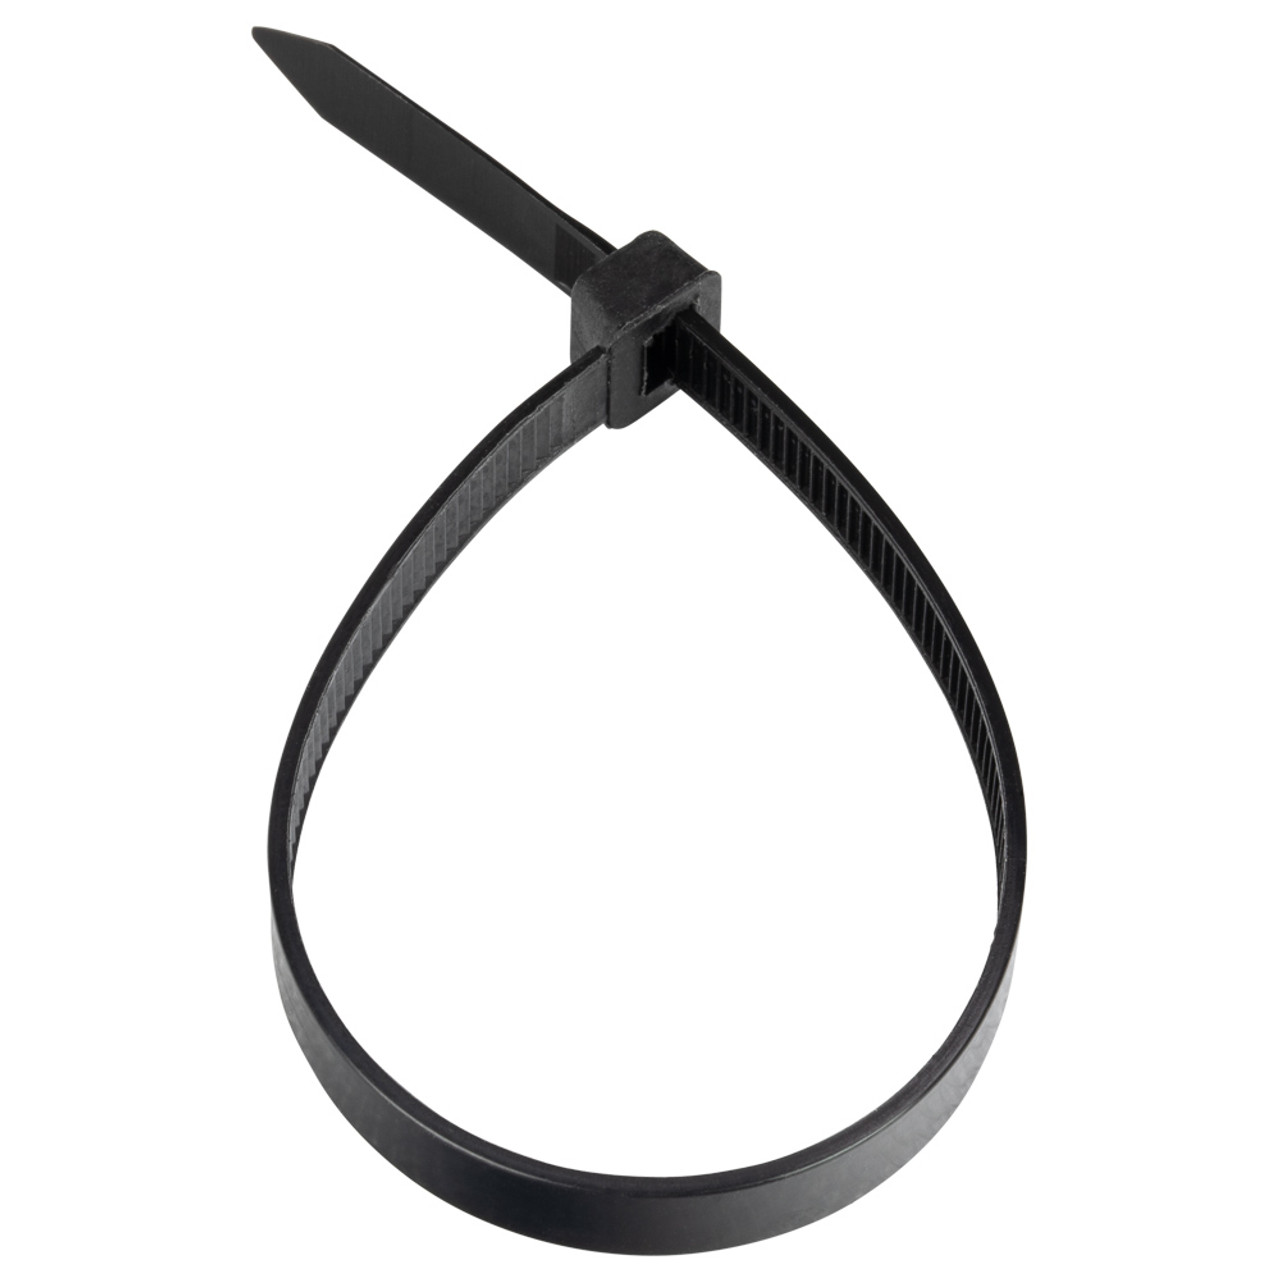 NavePoint 14 Inch Nylon Black Cable Ties 120 Lbs - 100 Pack